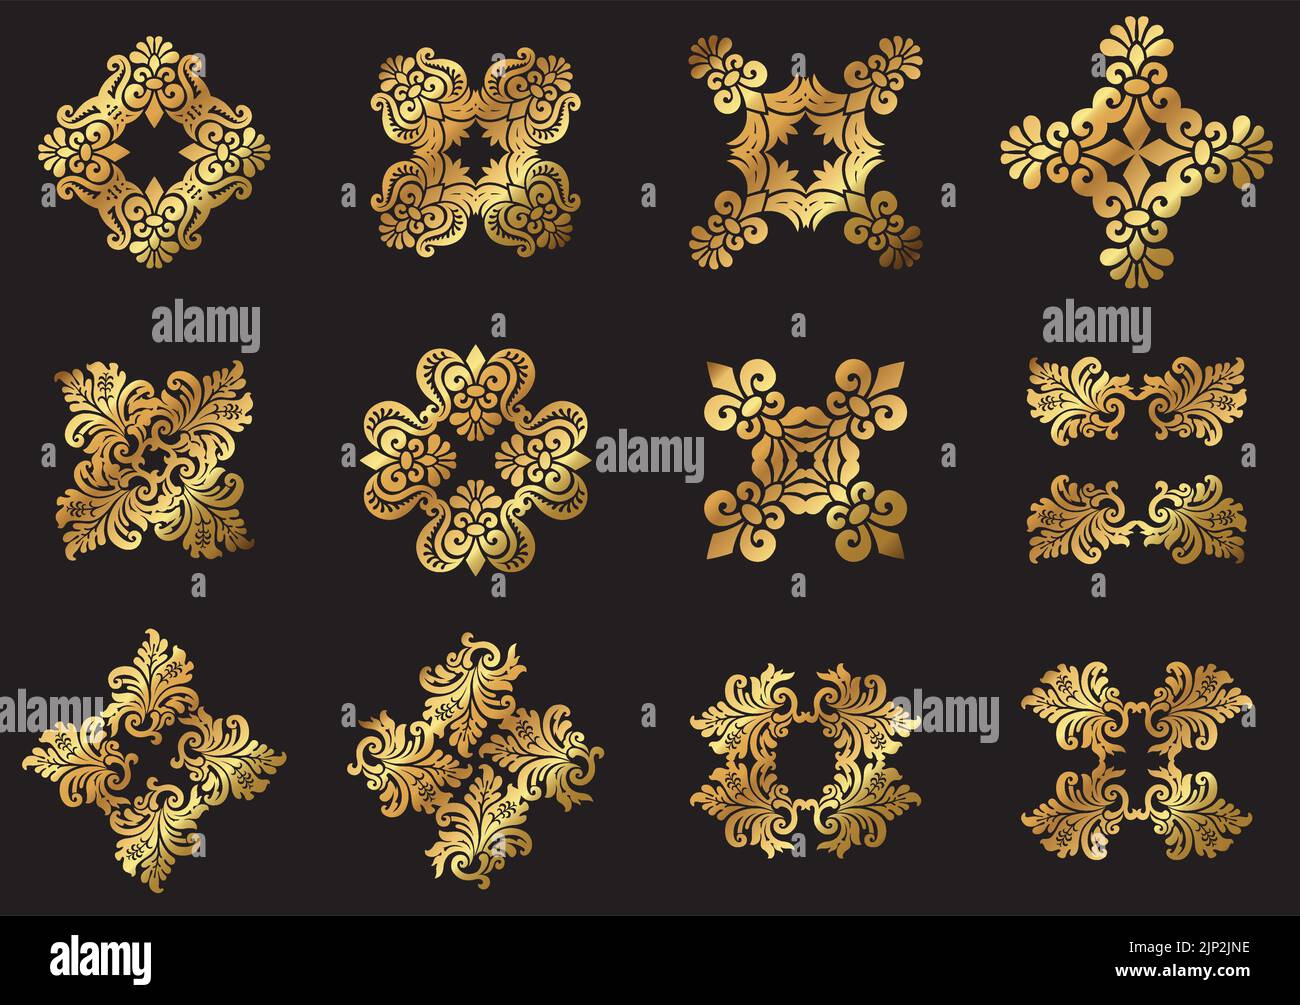 A set of vintage vector gold decorative floral damask icons. Stock Vector